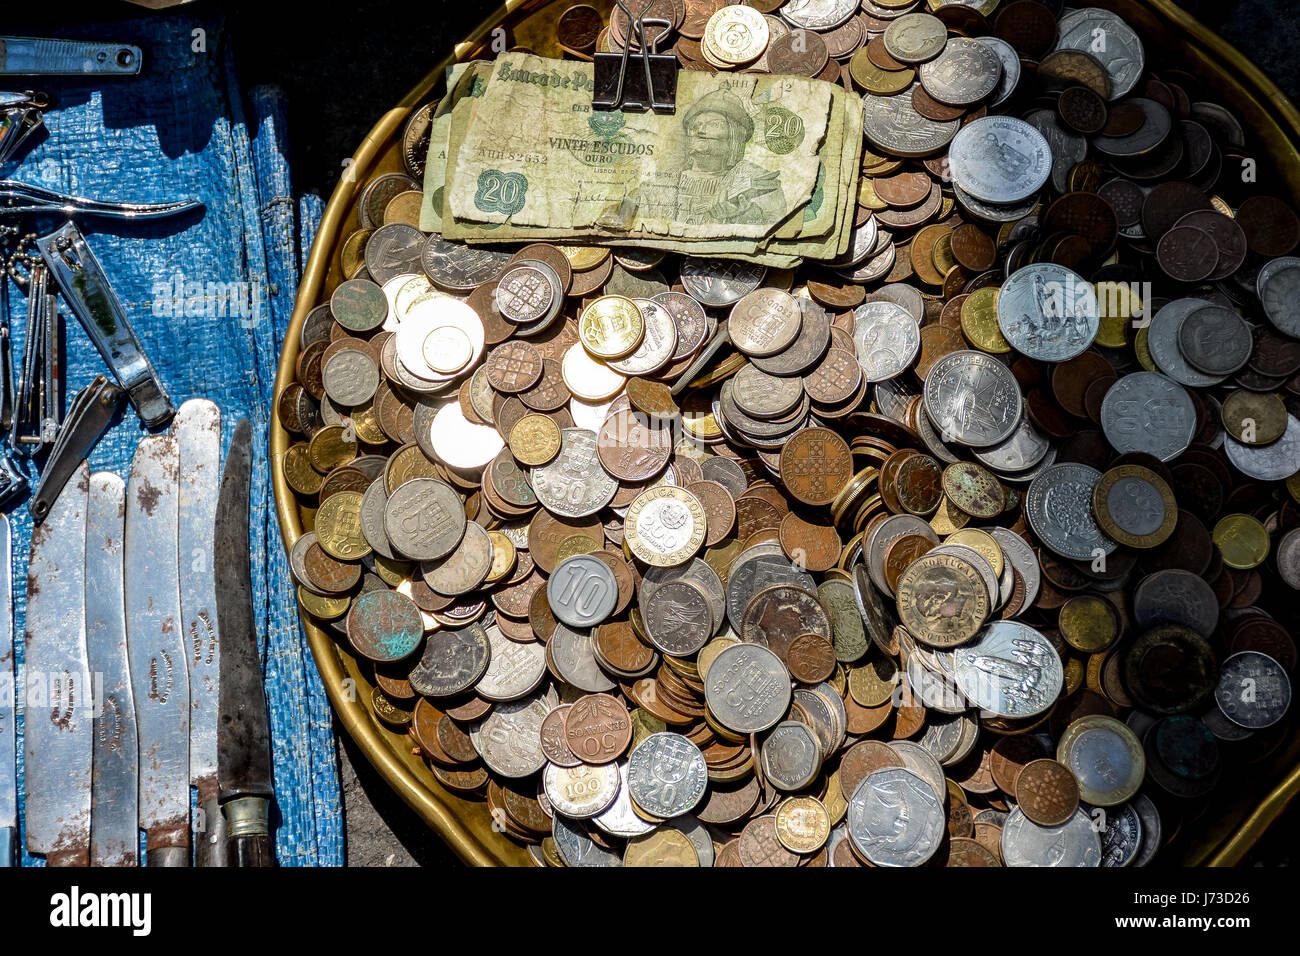 Lots of cash money in coins Stock Photo